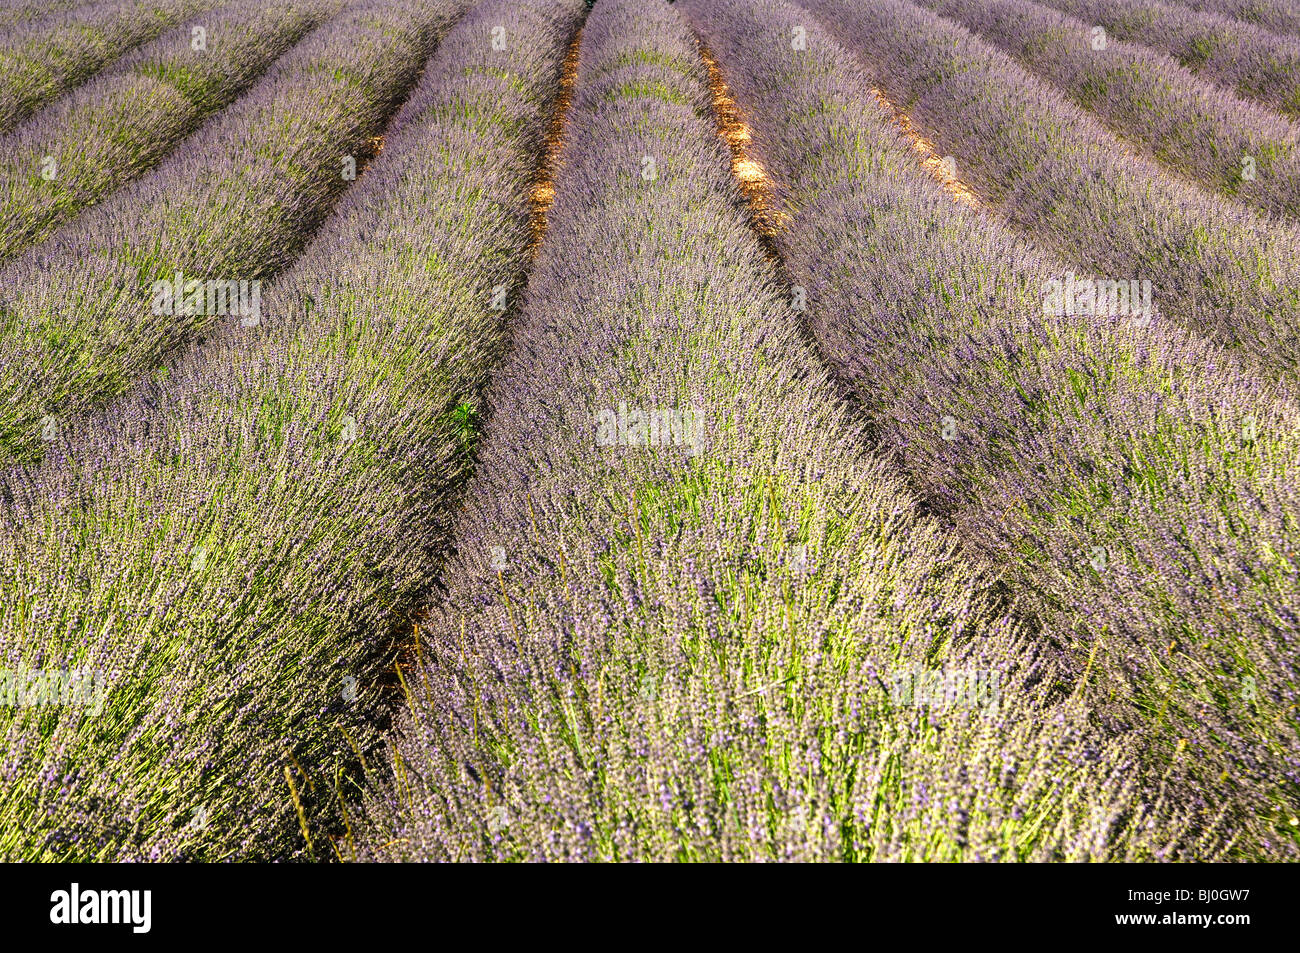 Row cultivation of lavender near Sault, Provence, France Stock Photo